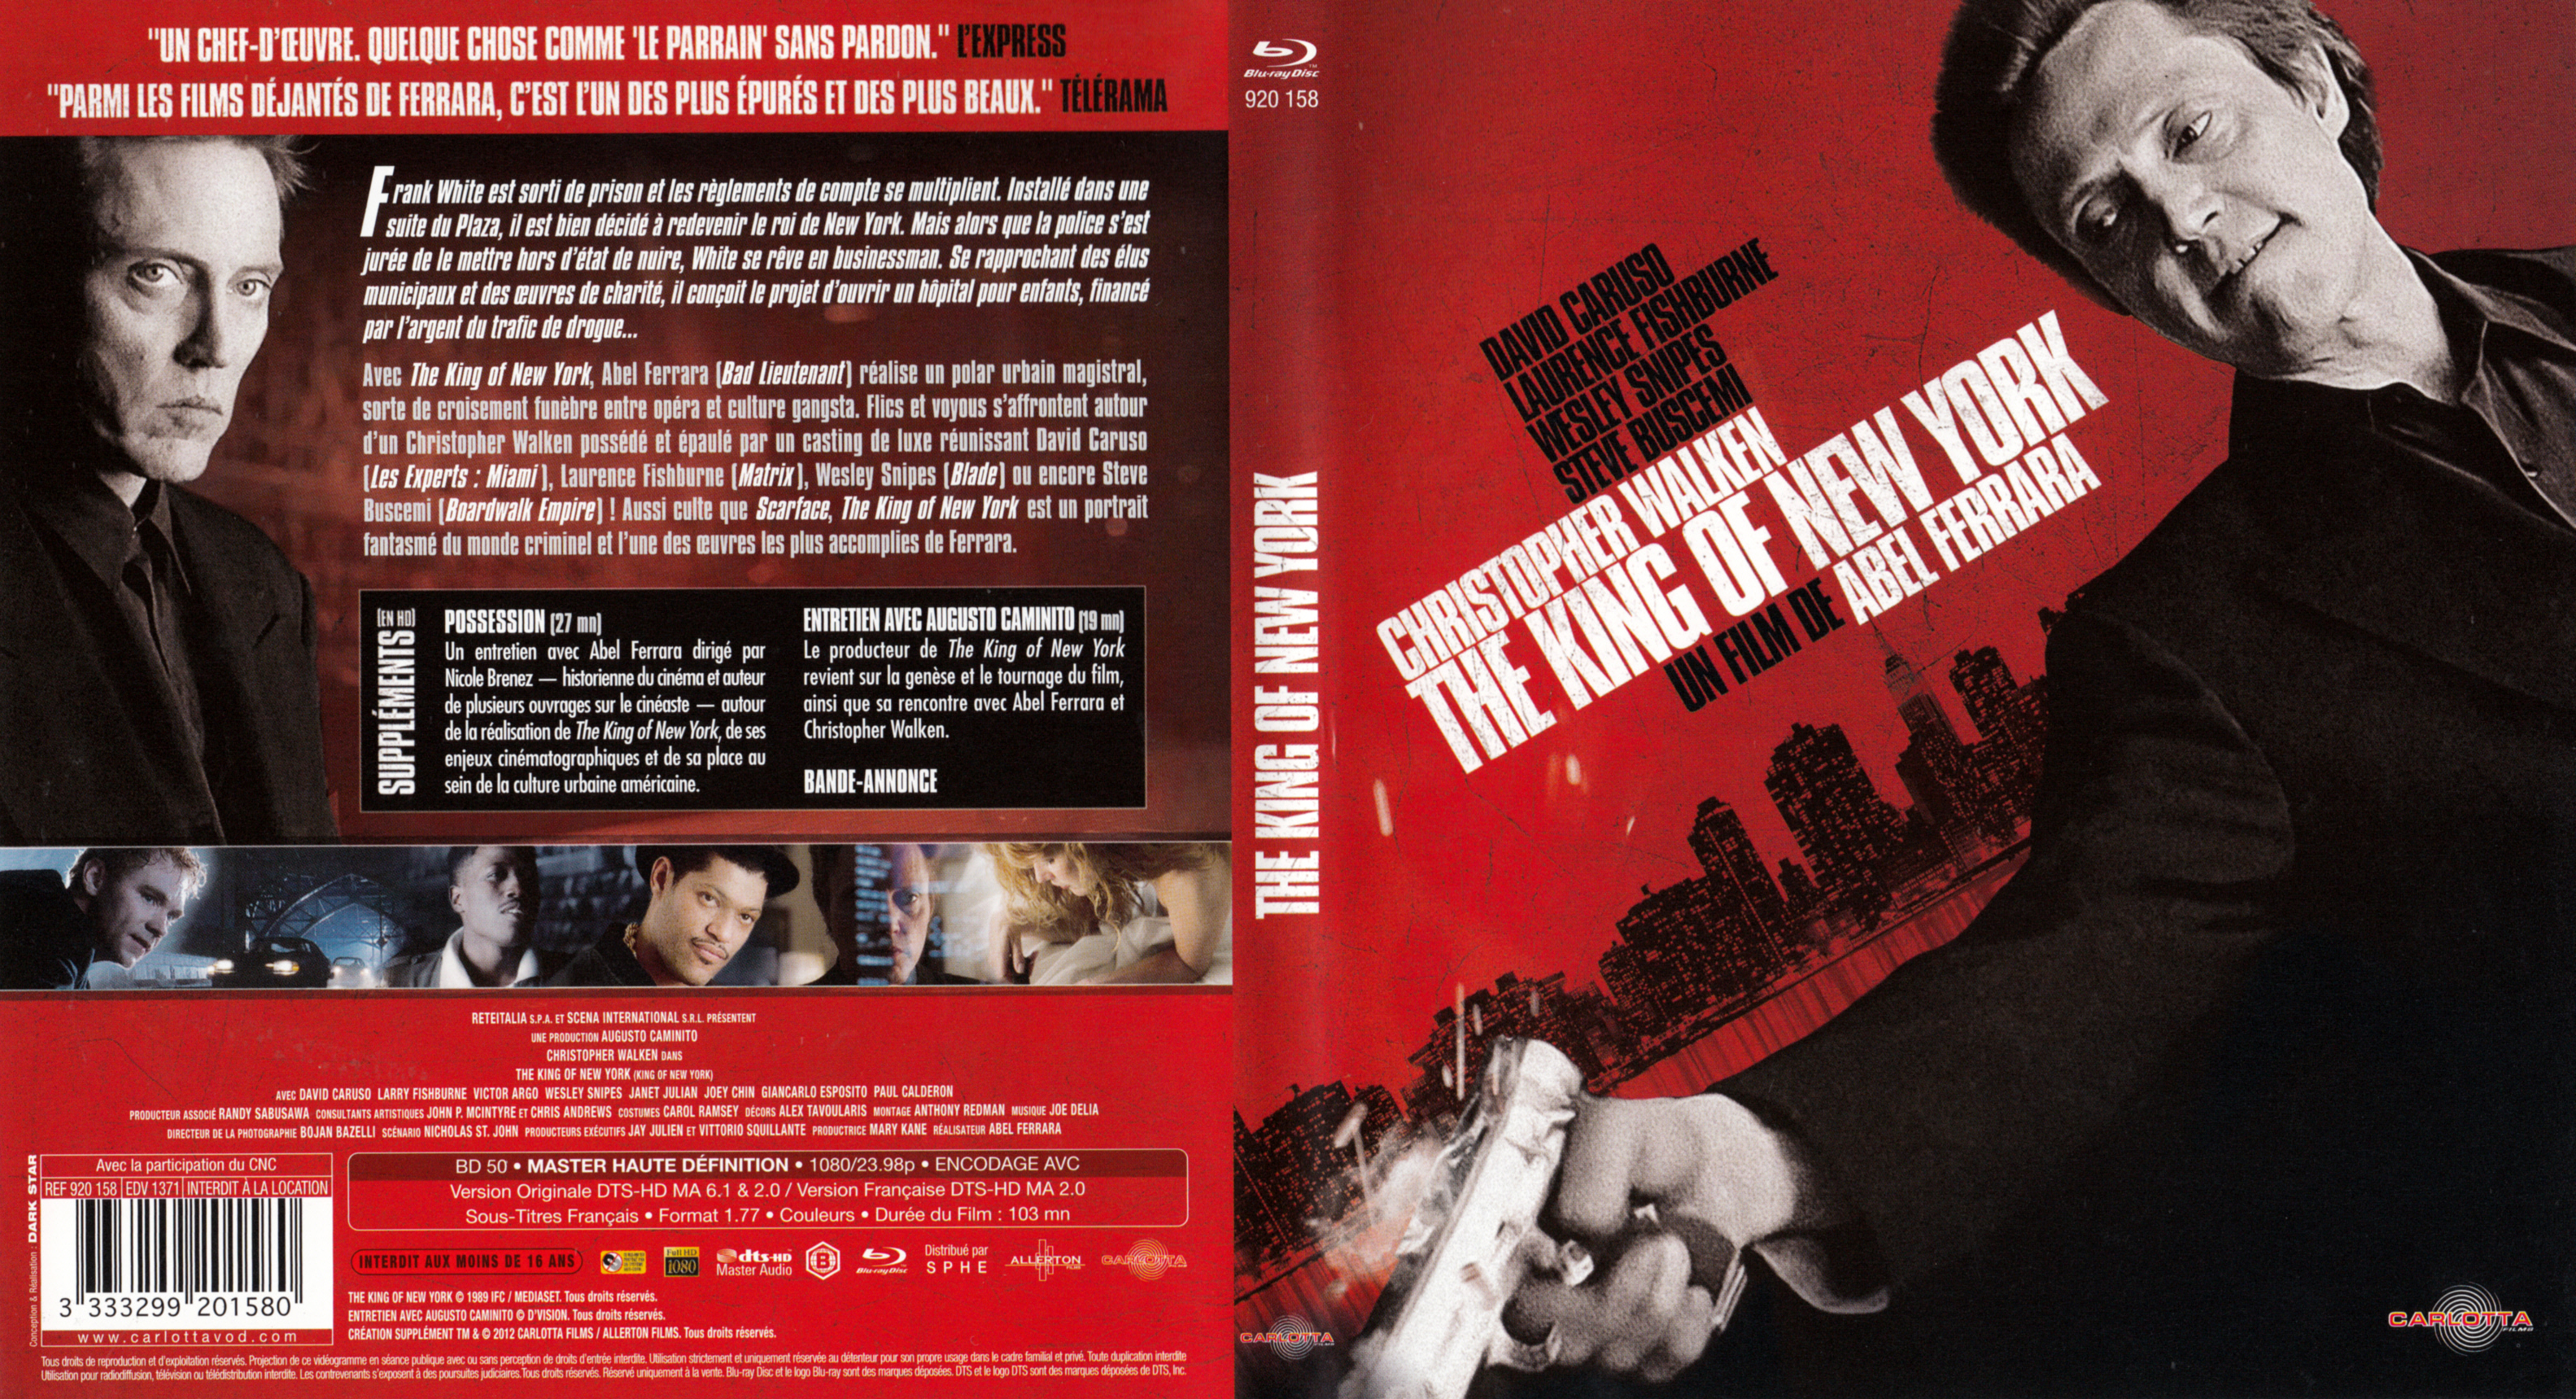 Jaquette DVD The King of New York (BLU-RAY) v2